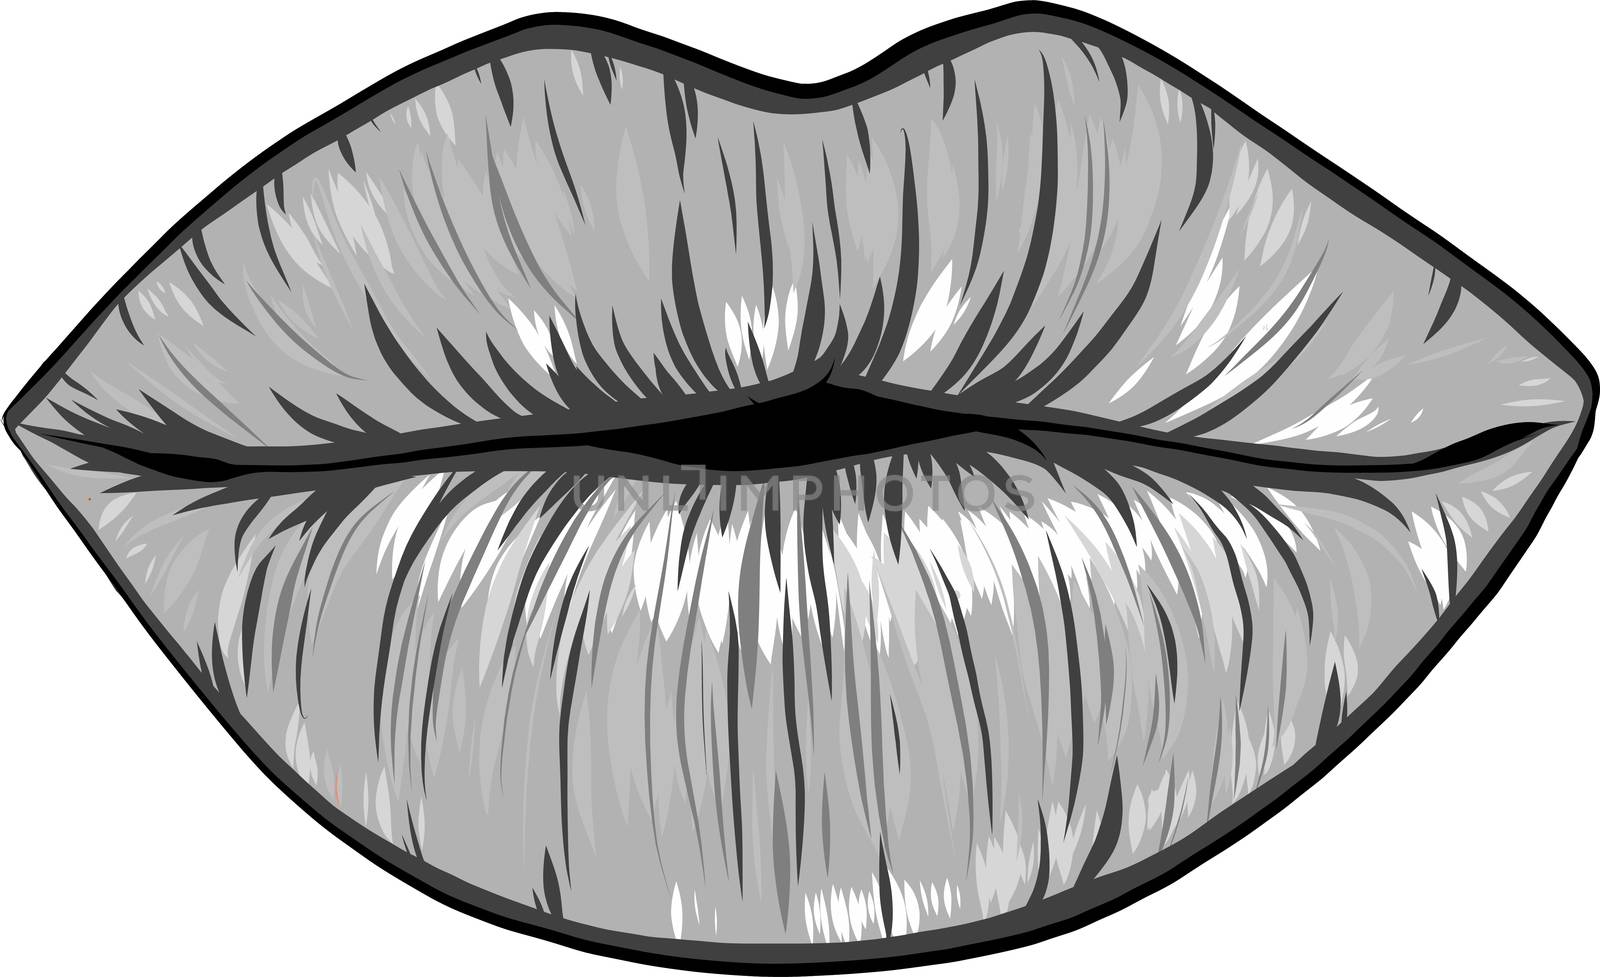 Woman's open mouth with sexy lips and tongue. illustration.